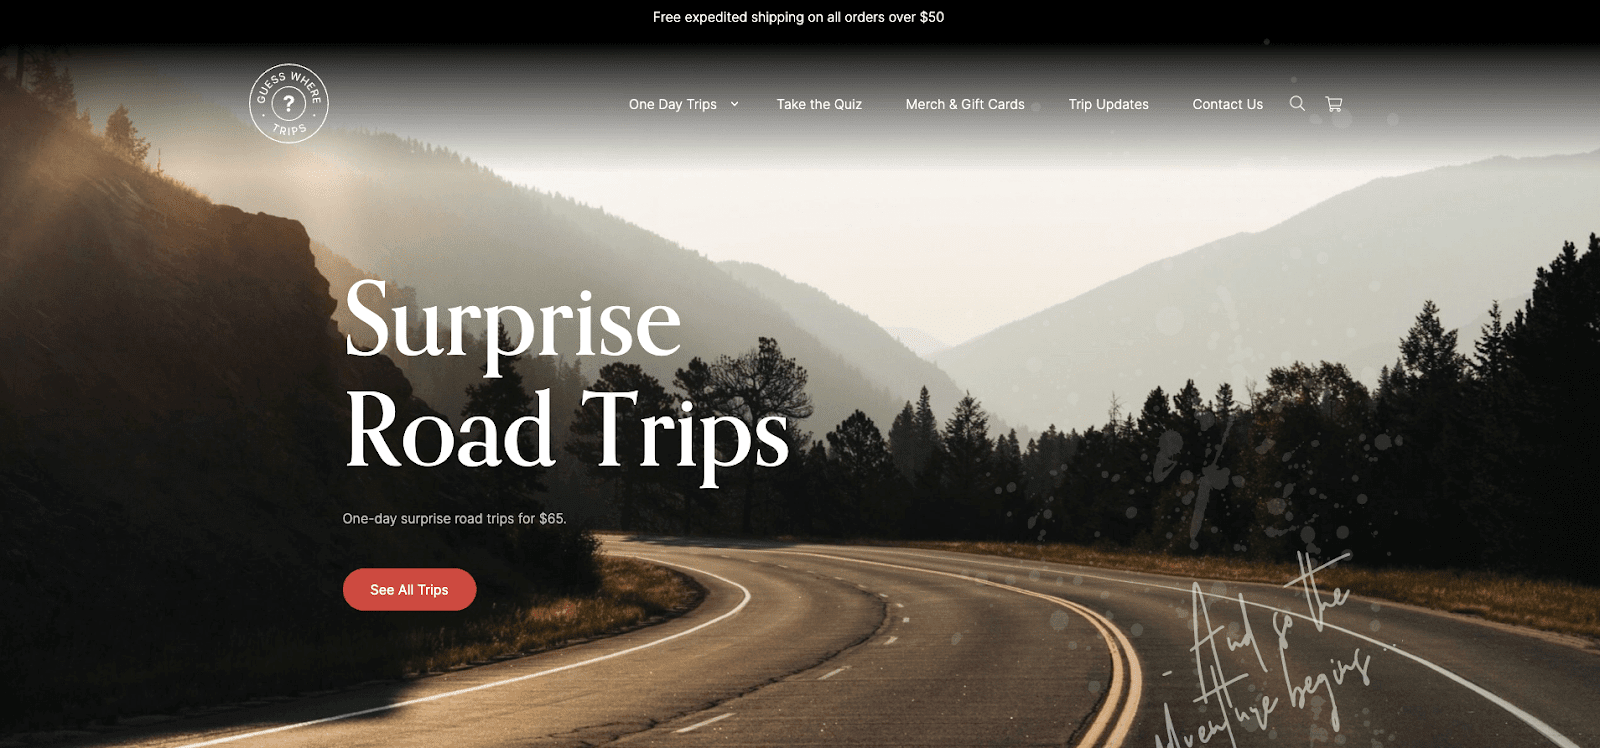 Valentine’s Day Gift Guide–A screenshot from Guess Where Trips’ homepage. There is an image of a curved road, with forests and mountains in the background. In the foreground, the text says, “Surprise Road Trips. One-day surprise trips for $65”. There is a red button with white text that says, “See All Trips”. 